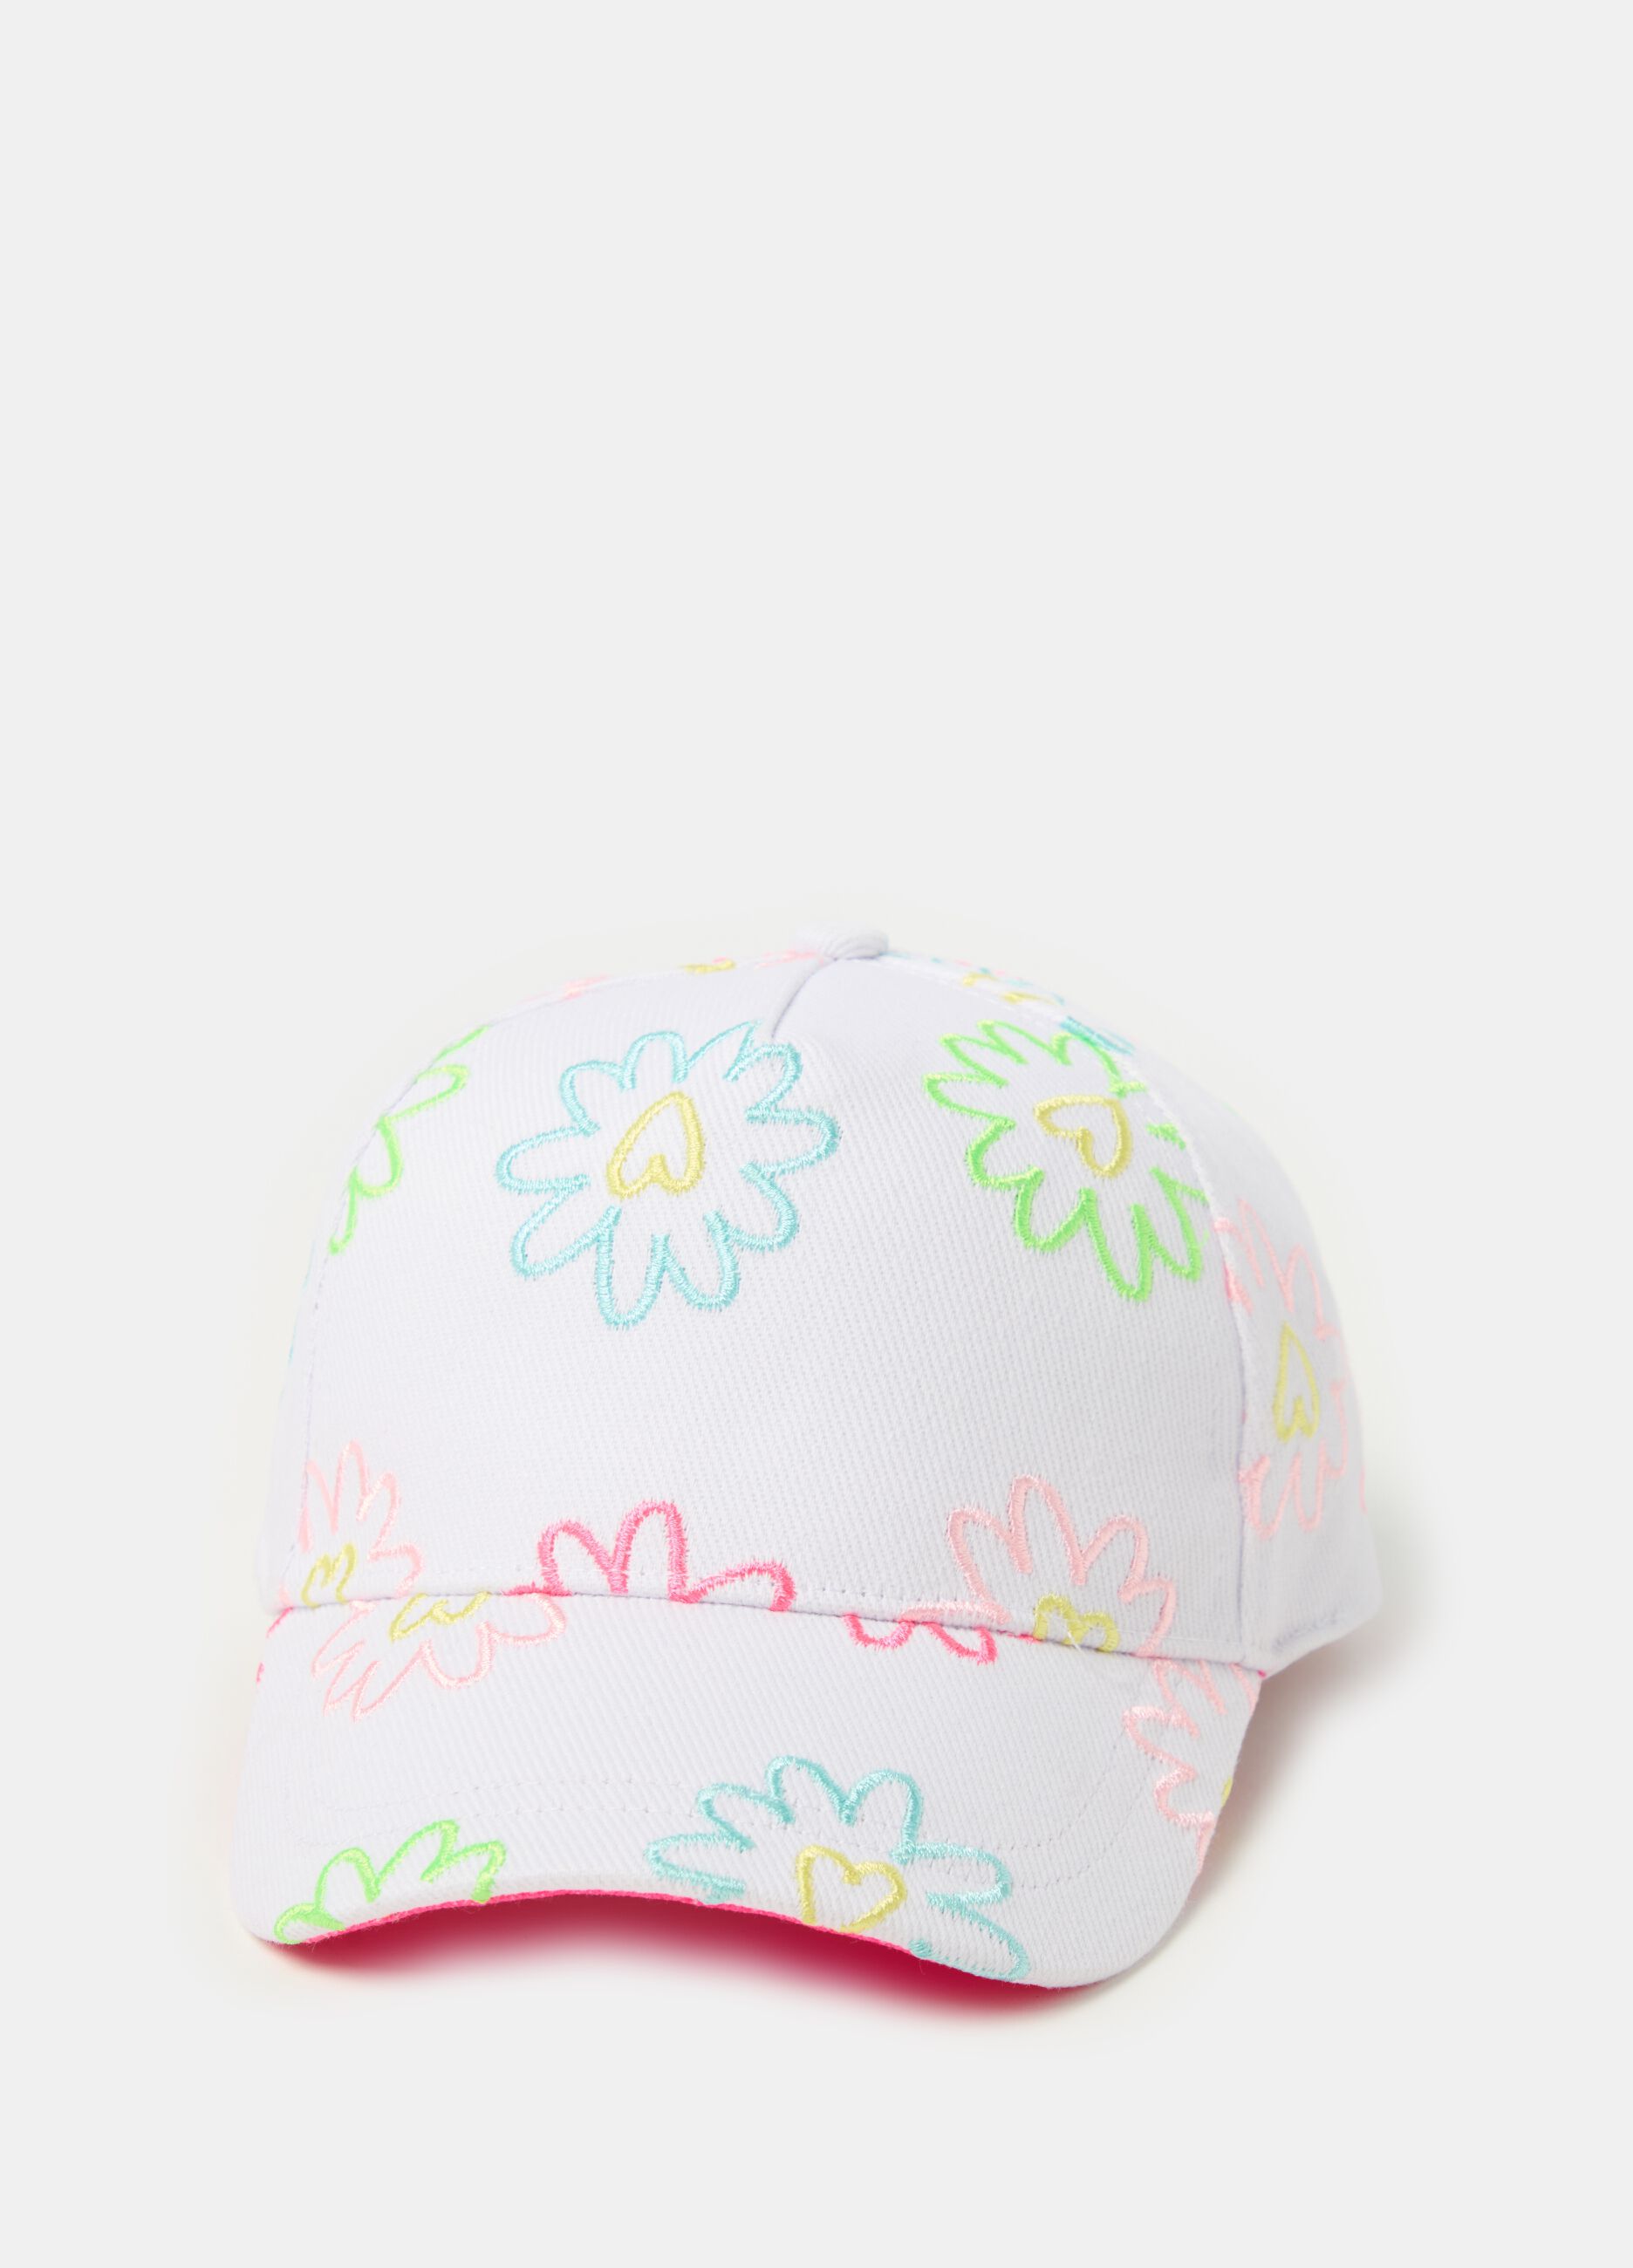 Organic cotton hat with flowers embroidery